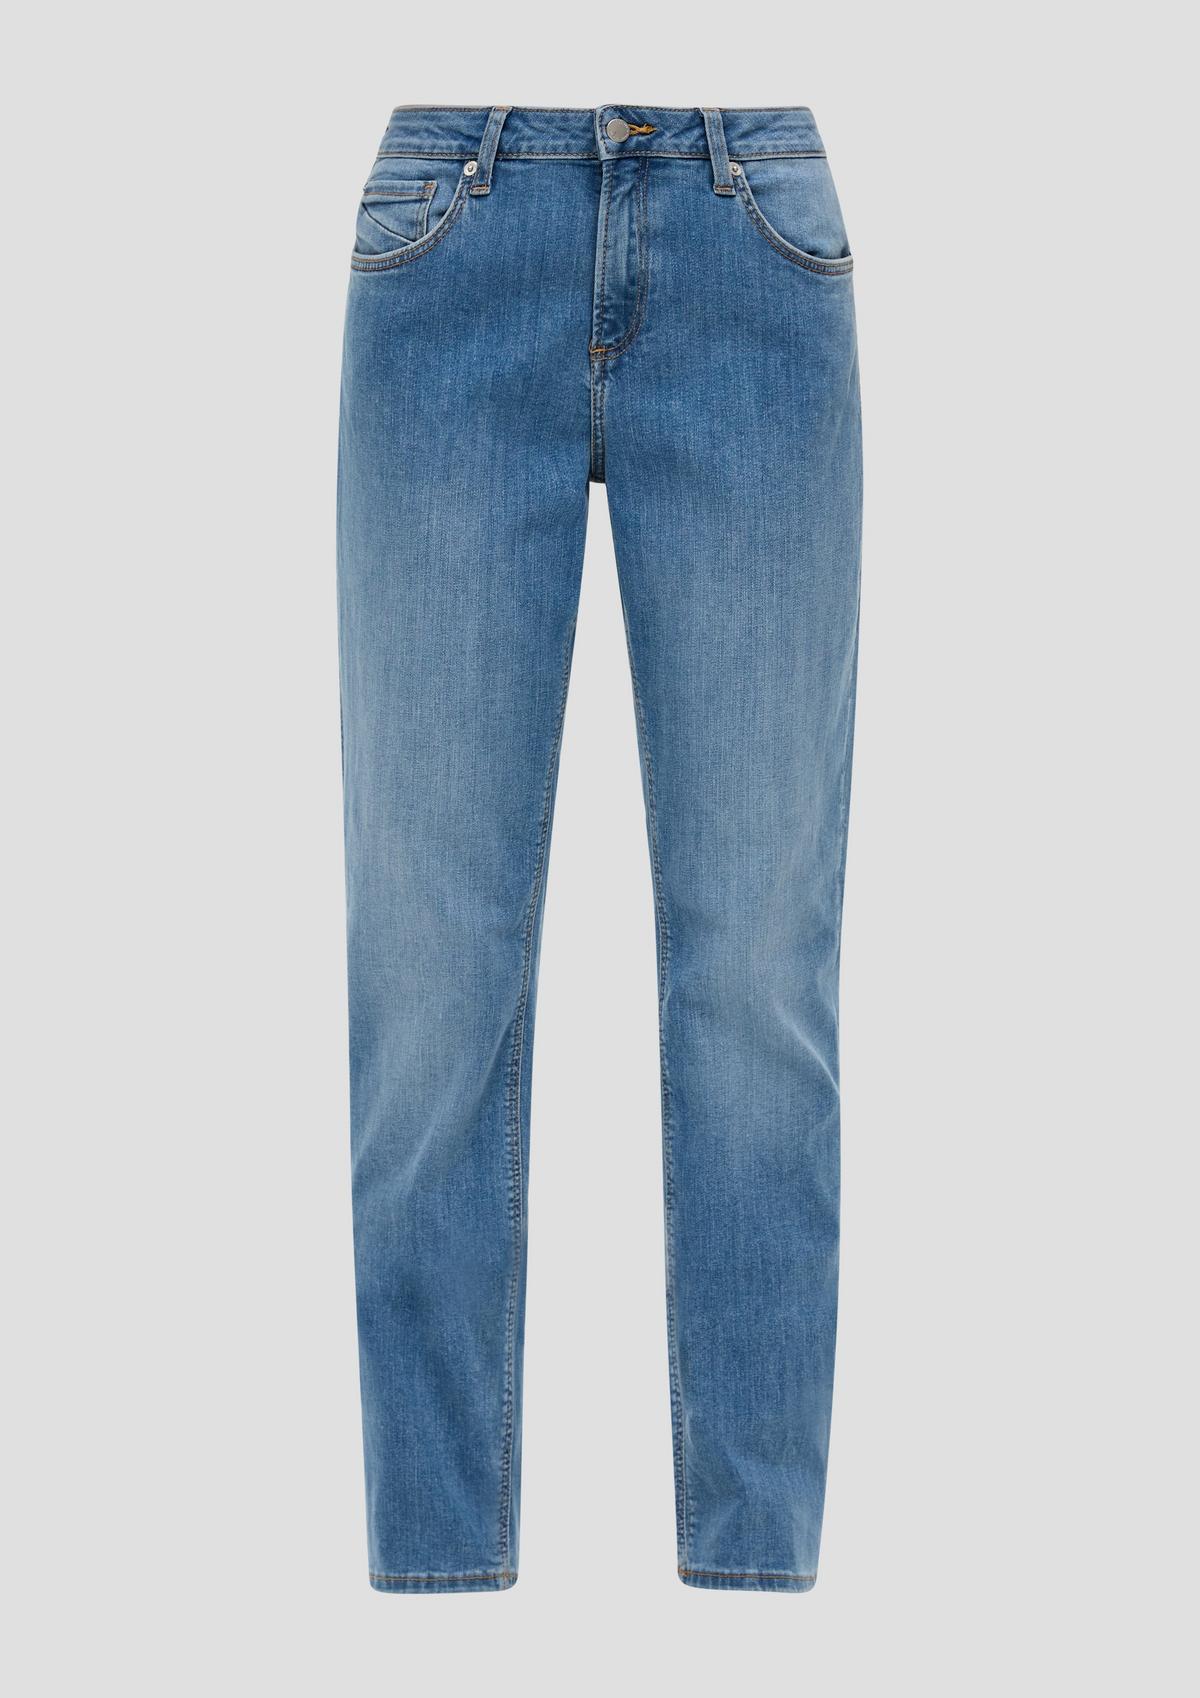 s.Oliver Catie jeans / mid rise / straight leg